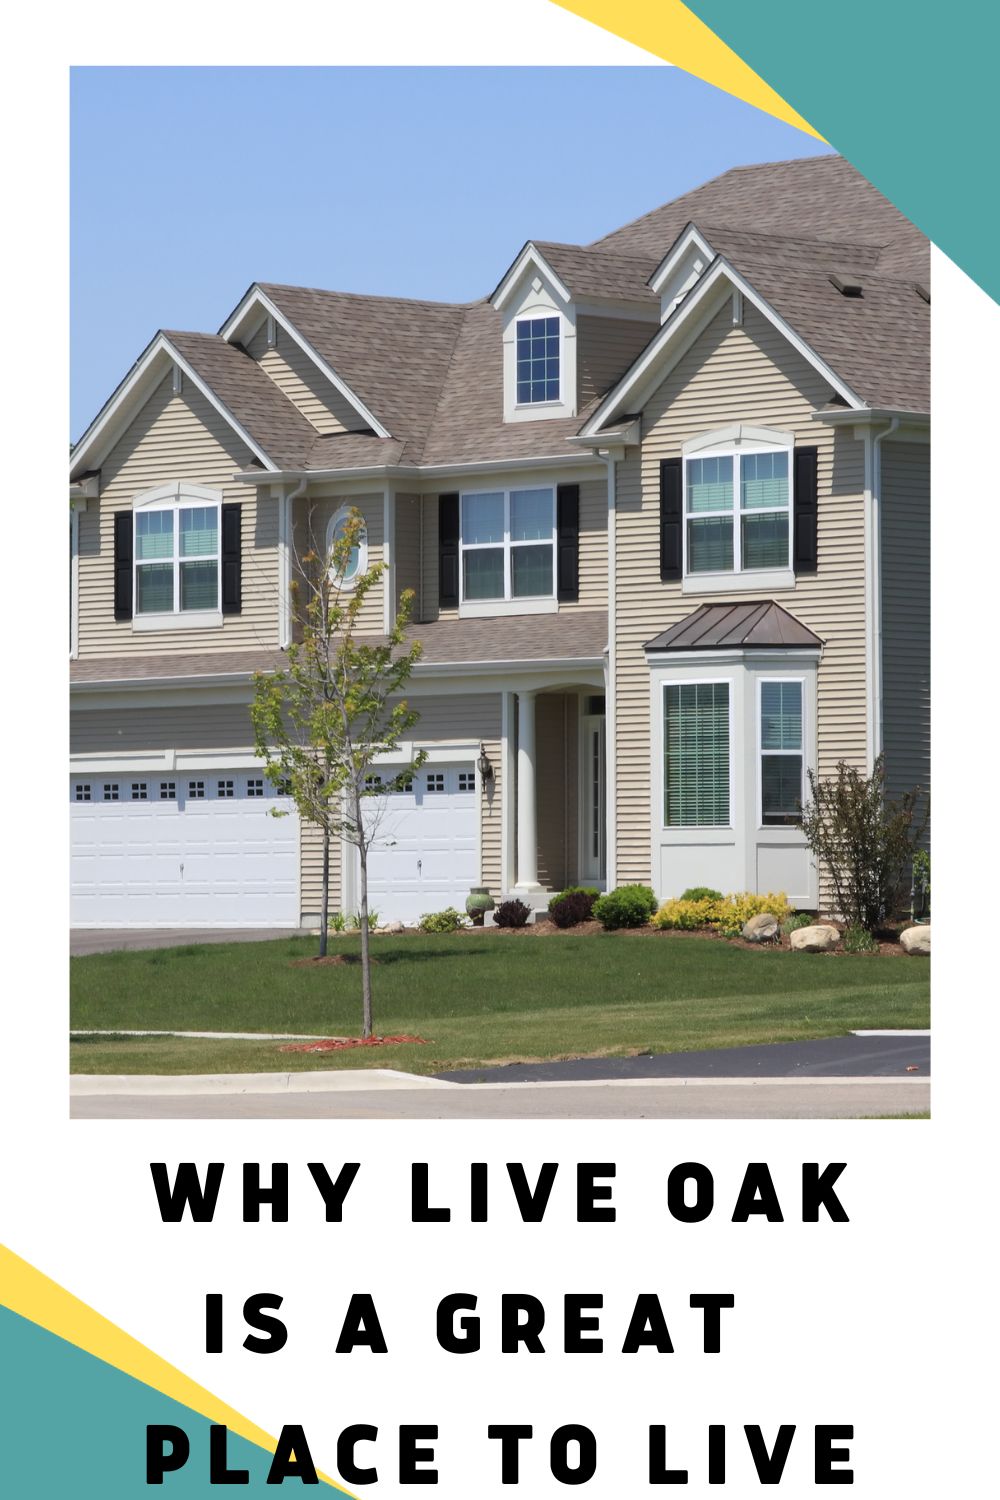 Why Live Oak is a Great a Place to Live